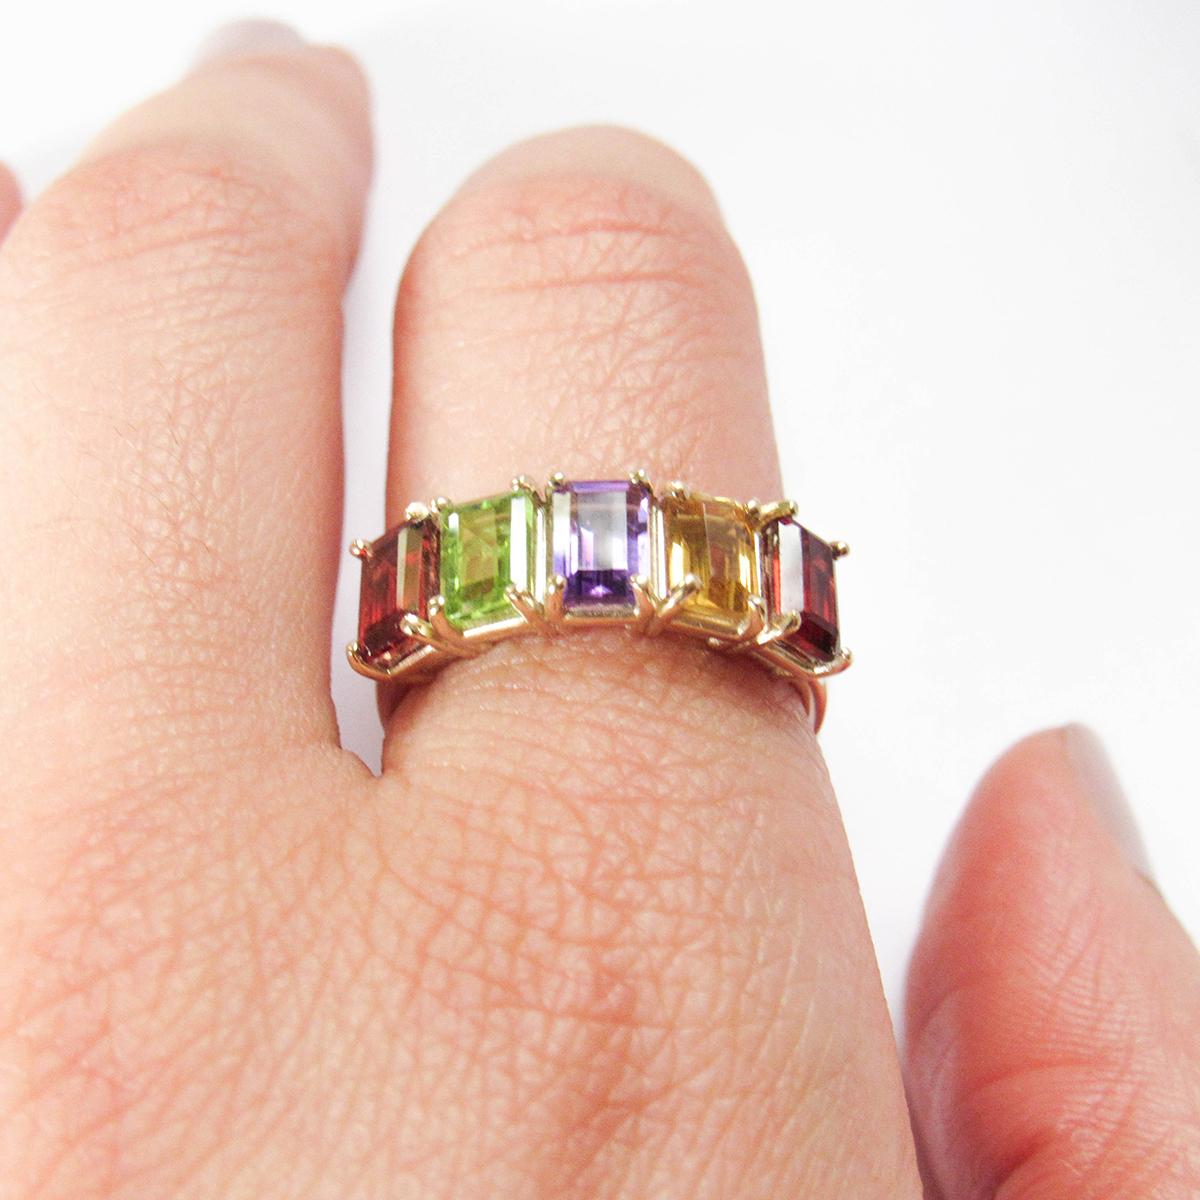 MADE TO ORDER *Please note that we take 45 business days to create your jewel before its ready to ship.  

A 14K yellow gold ring composed of 5 emerald cut colorful genuine gemstones. Each gemstone is selected to match the right amount of